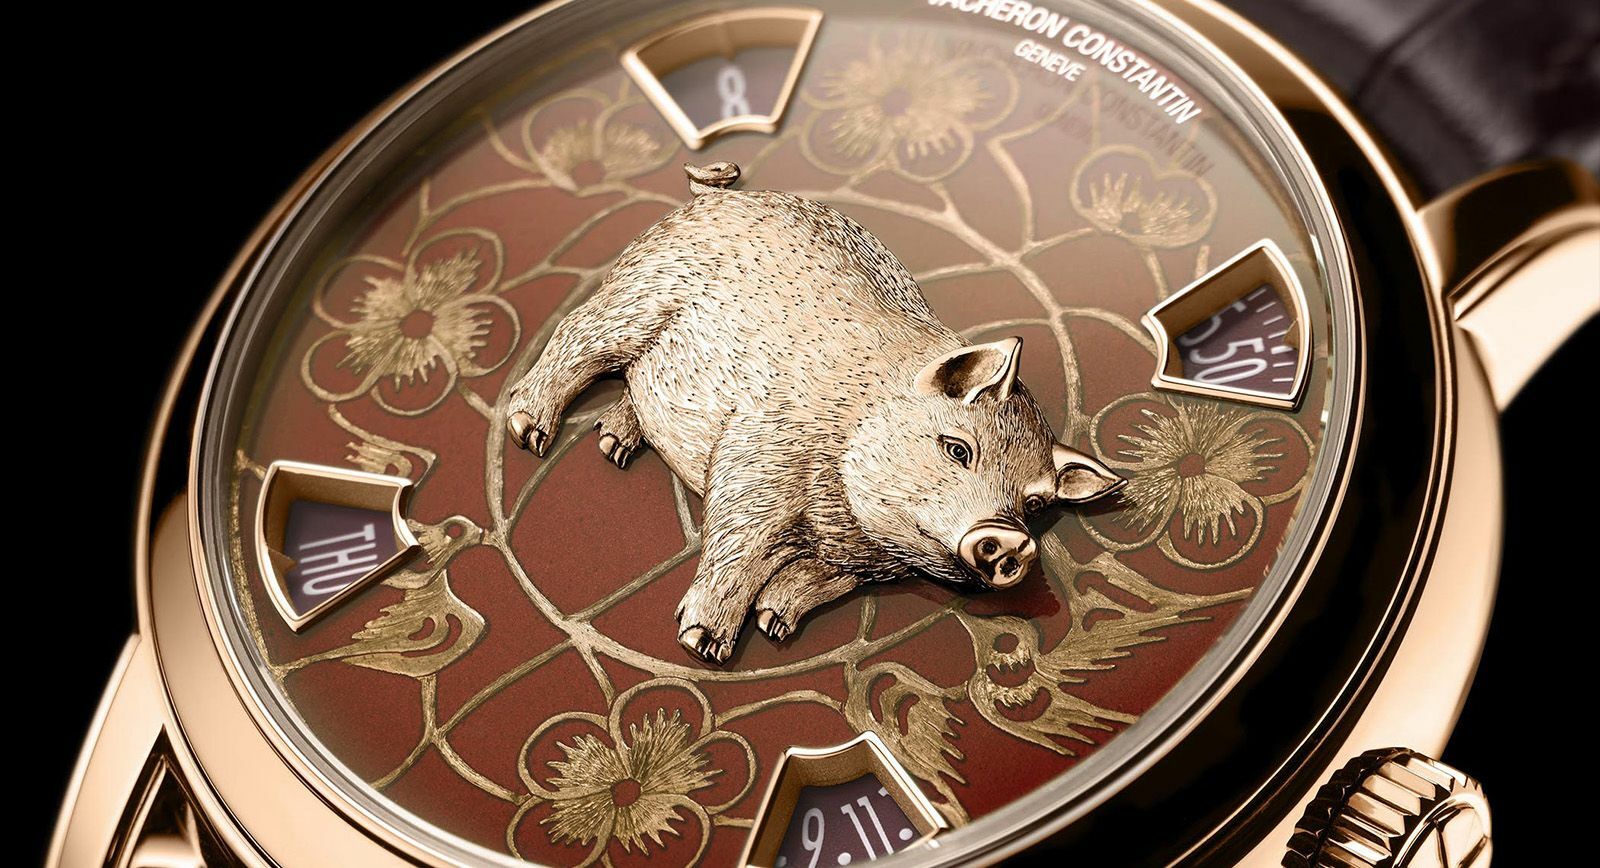 Pig watch by Vacheron Constantin for the Chinese year 2019 